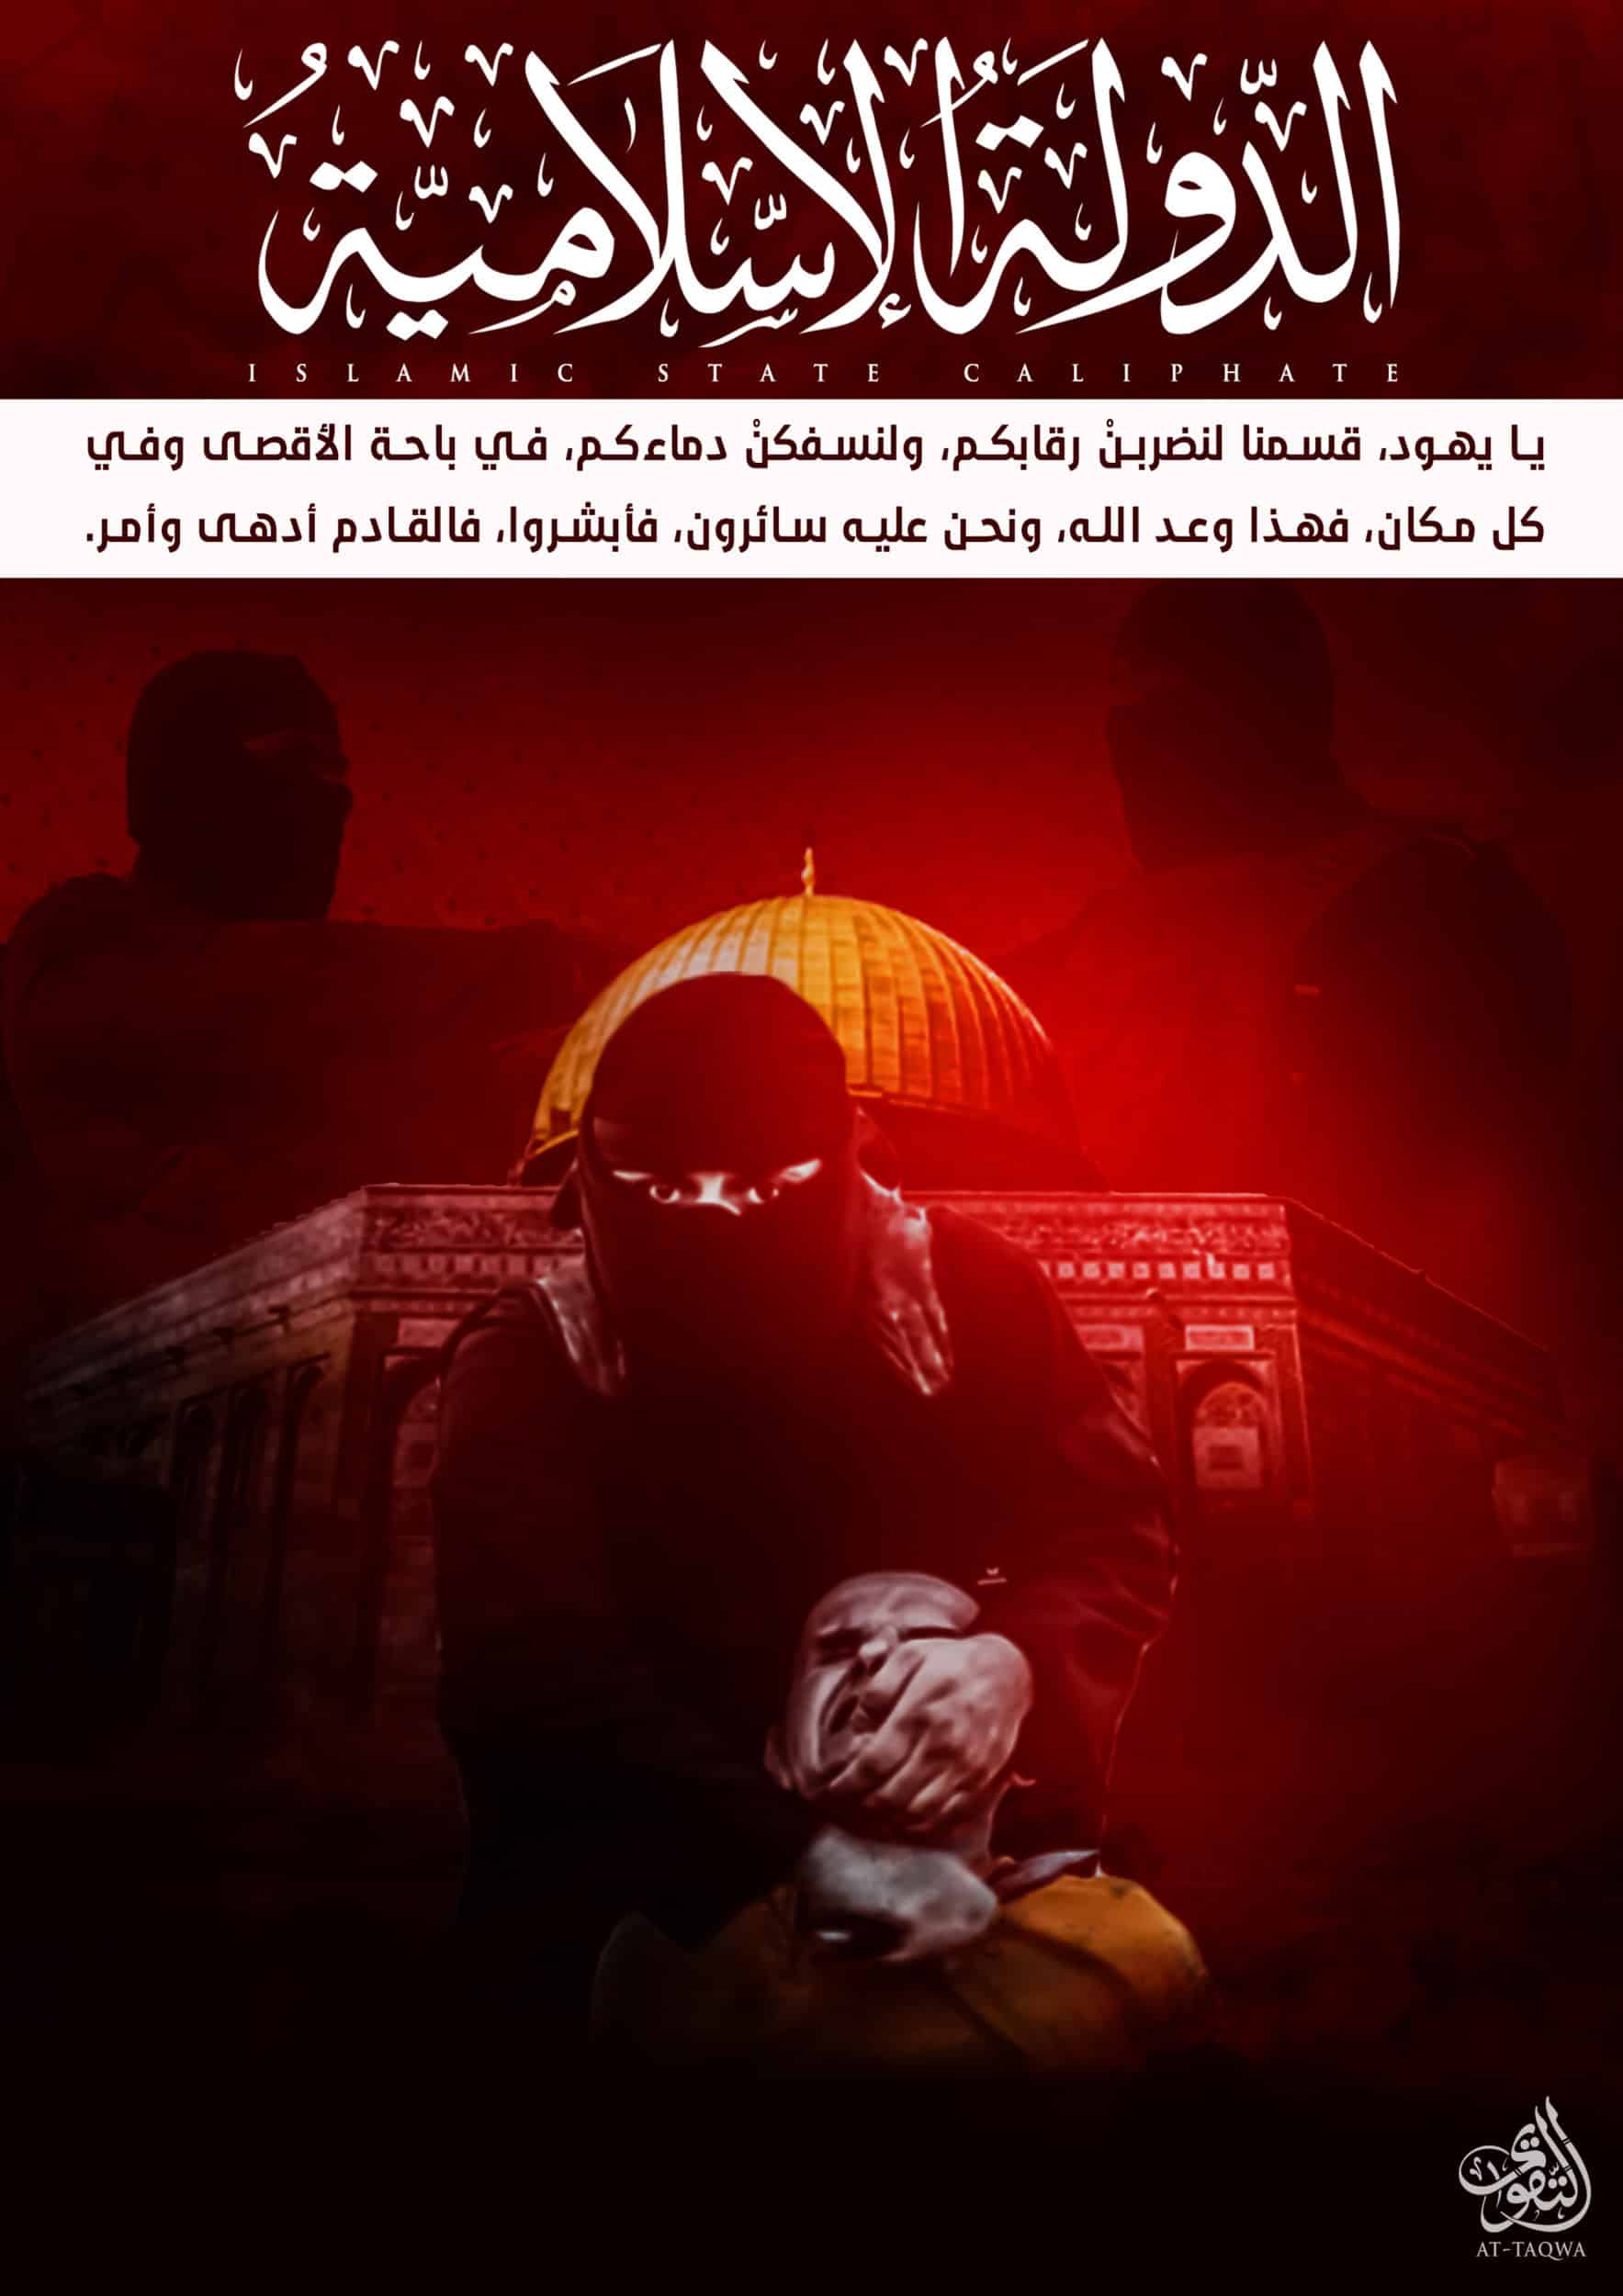 (Poster) al-Taqwa Media (Unofficial Islamic State): Jews, We Swear We'll Cut Your Throats and Let you Bleed in al-Aqsa and Everywhere, This is Allah's Promise and We Are on Its Path, What is Coming is More Bitter - 1 April 2022